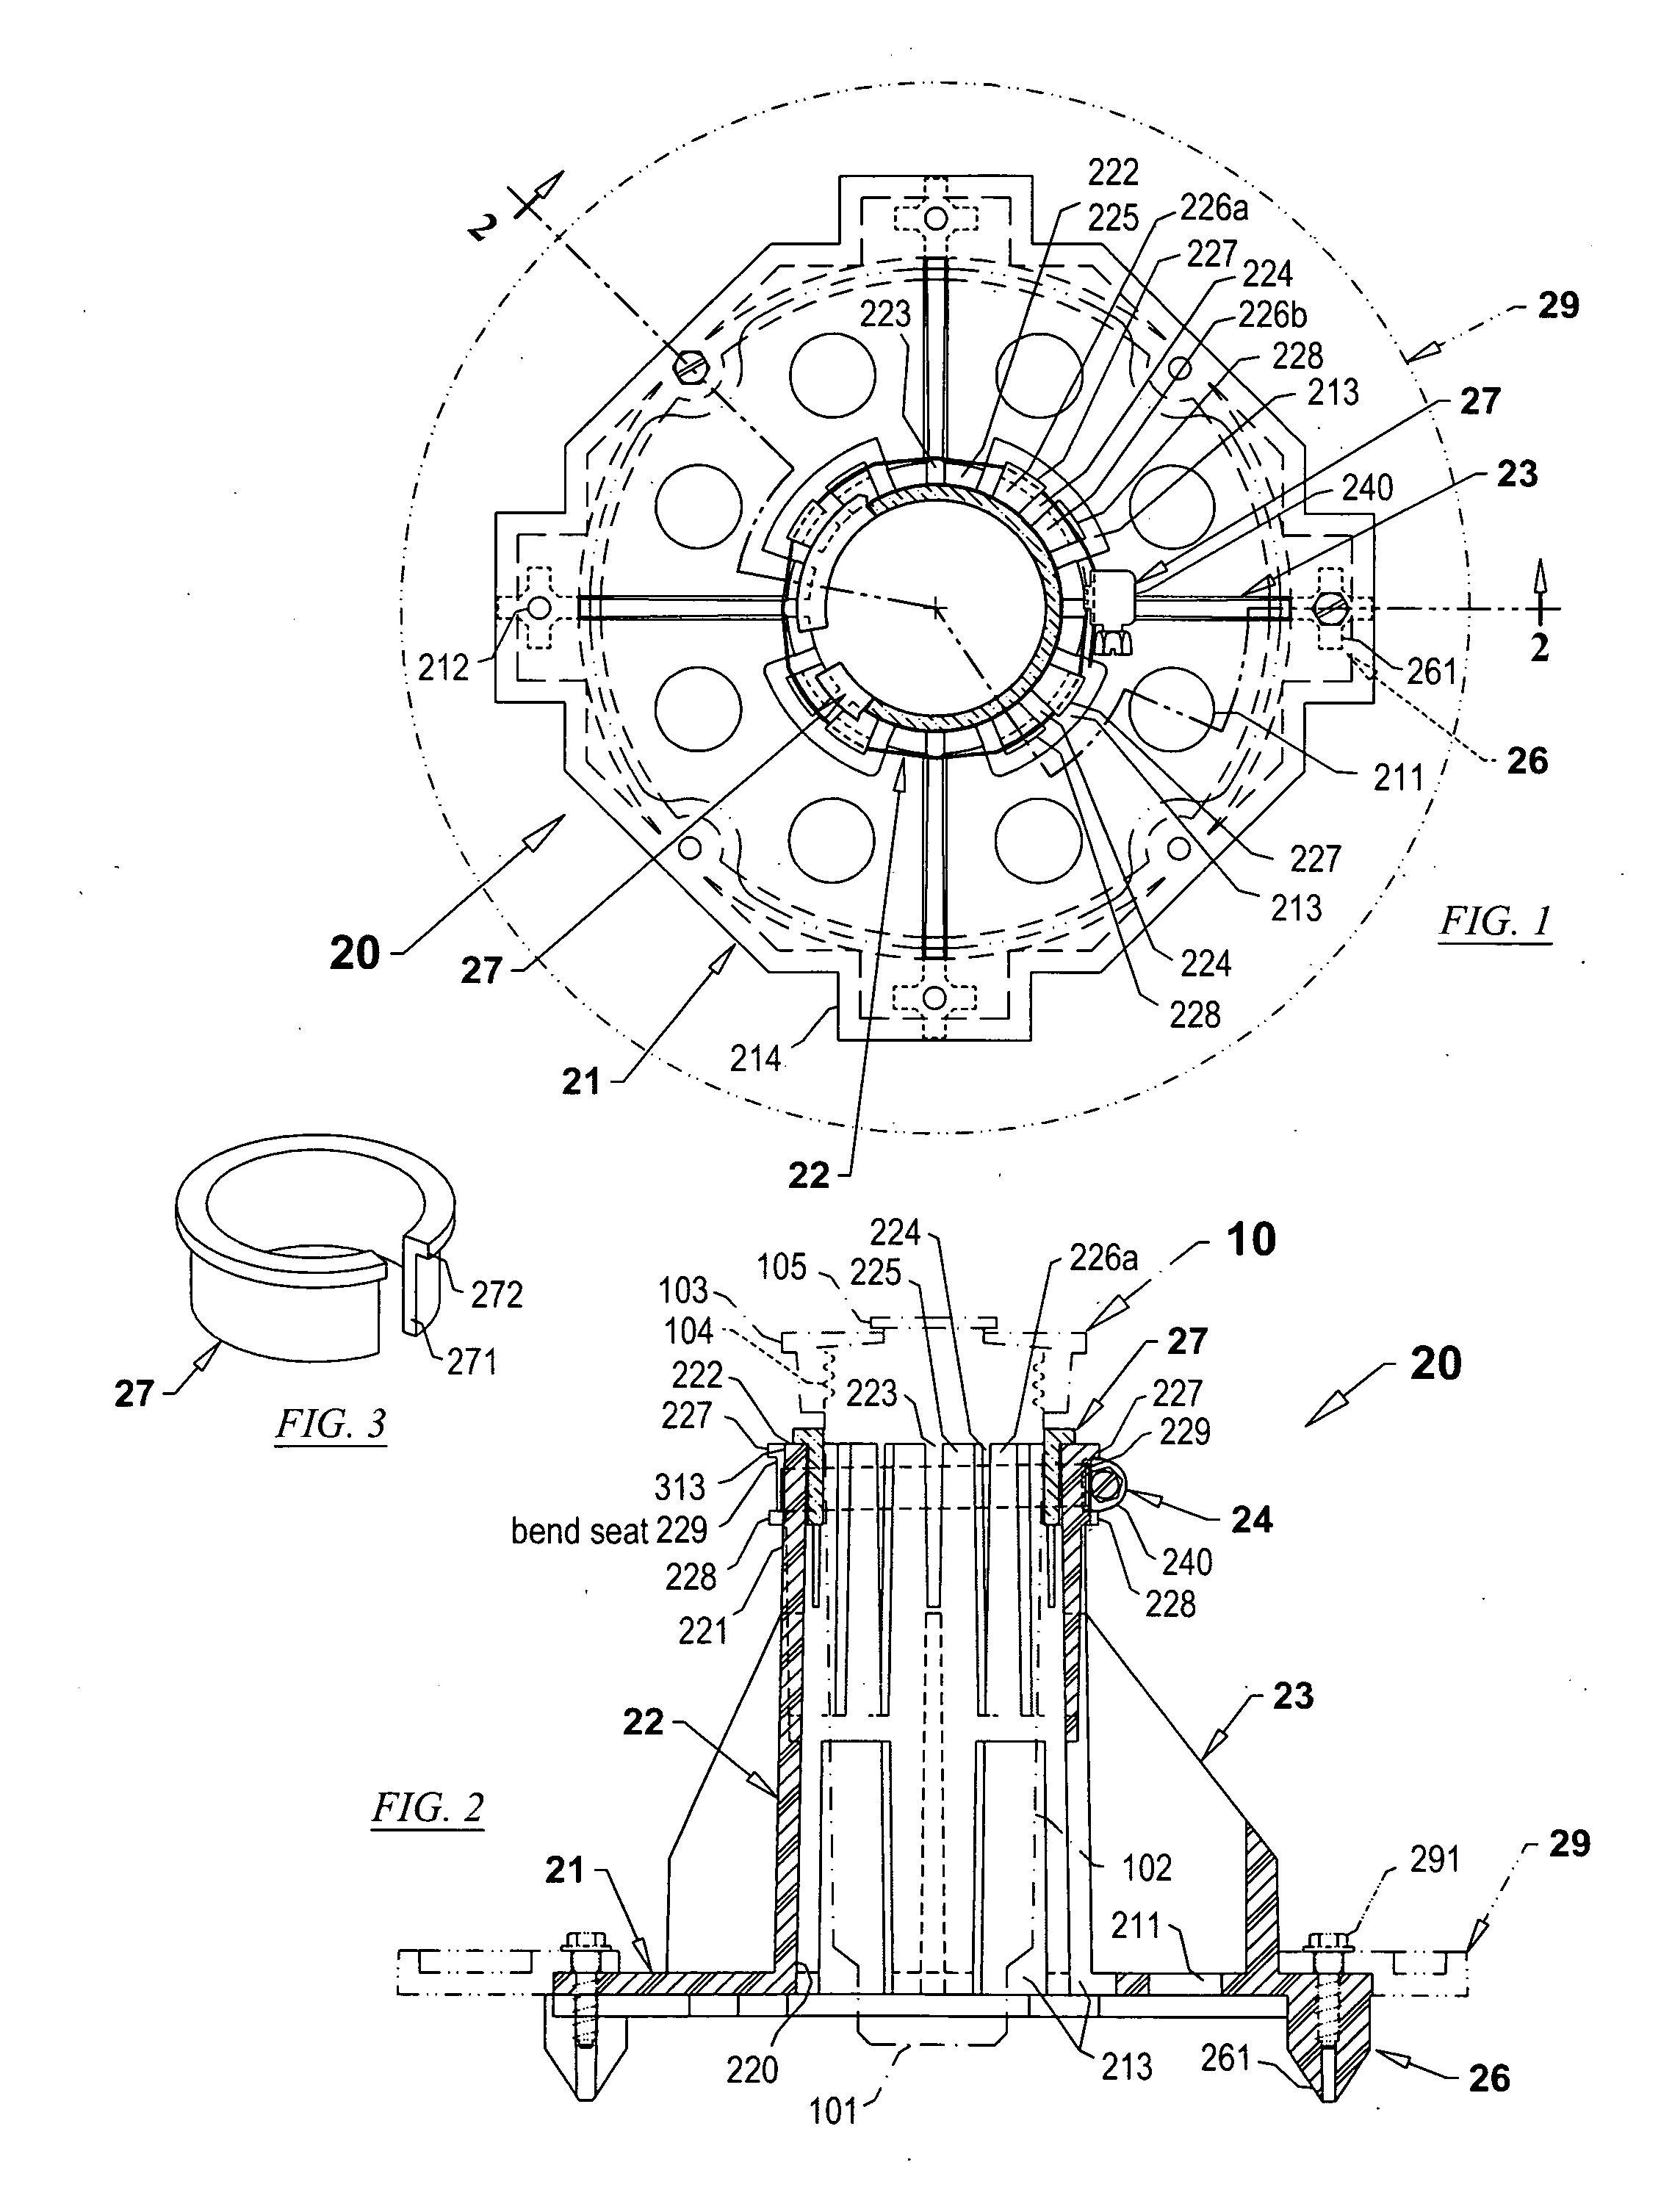 Device for supporting in-ground sprinkler heads